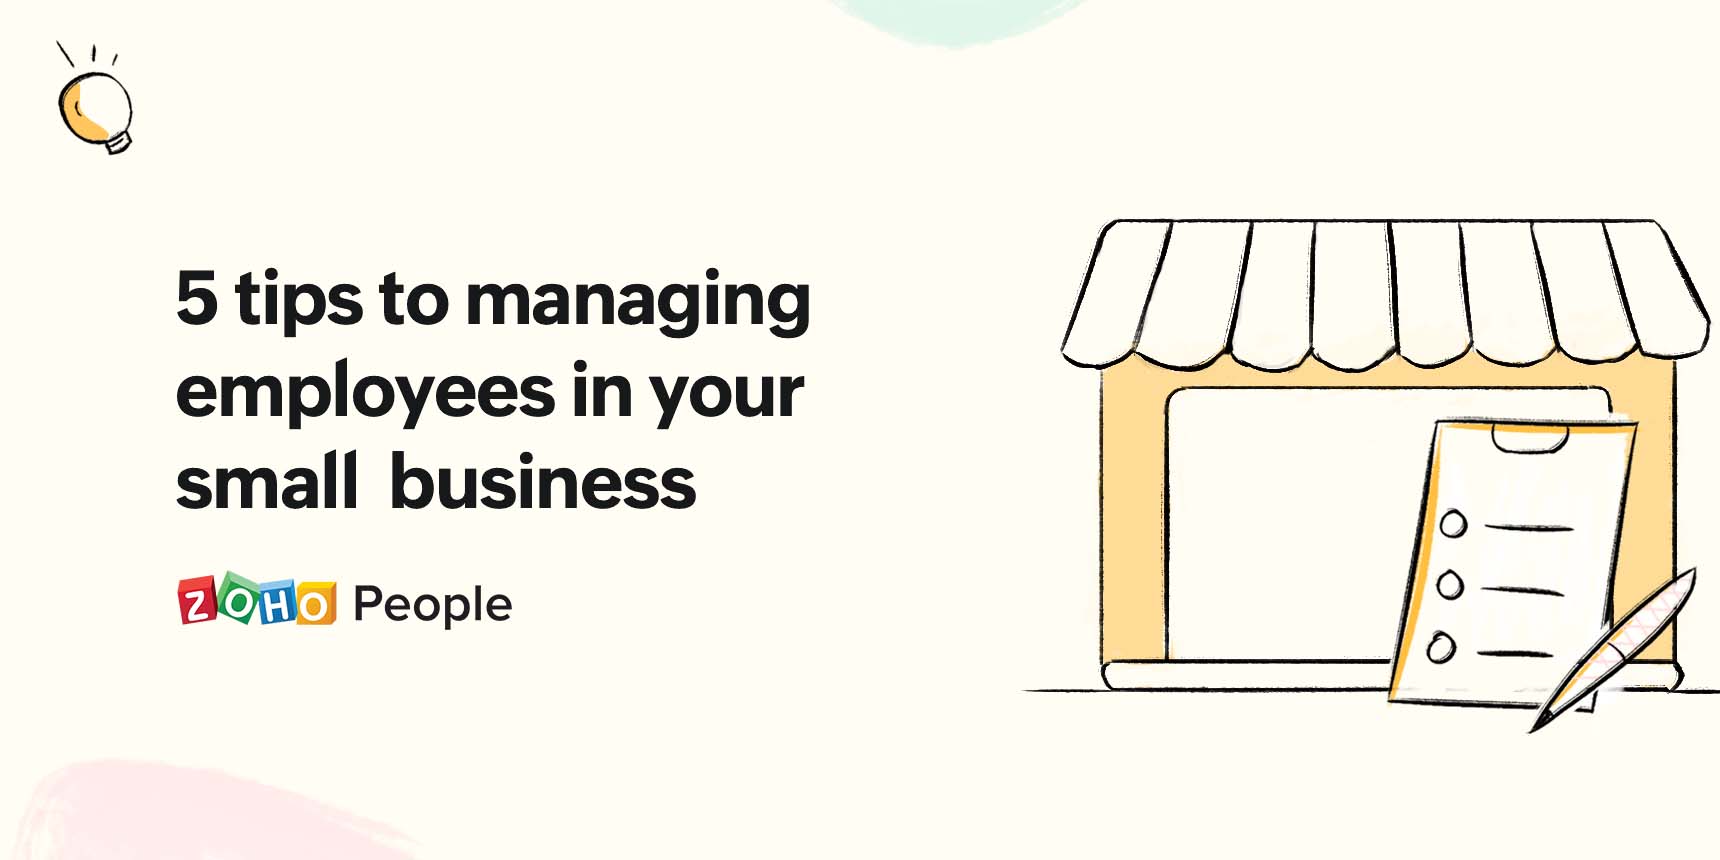 Here’s how small business owners can manage their workforce effectively